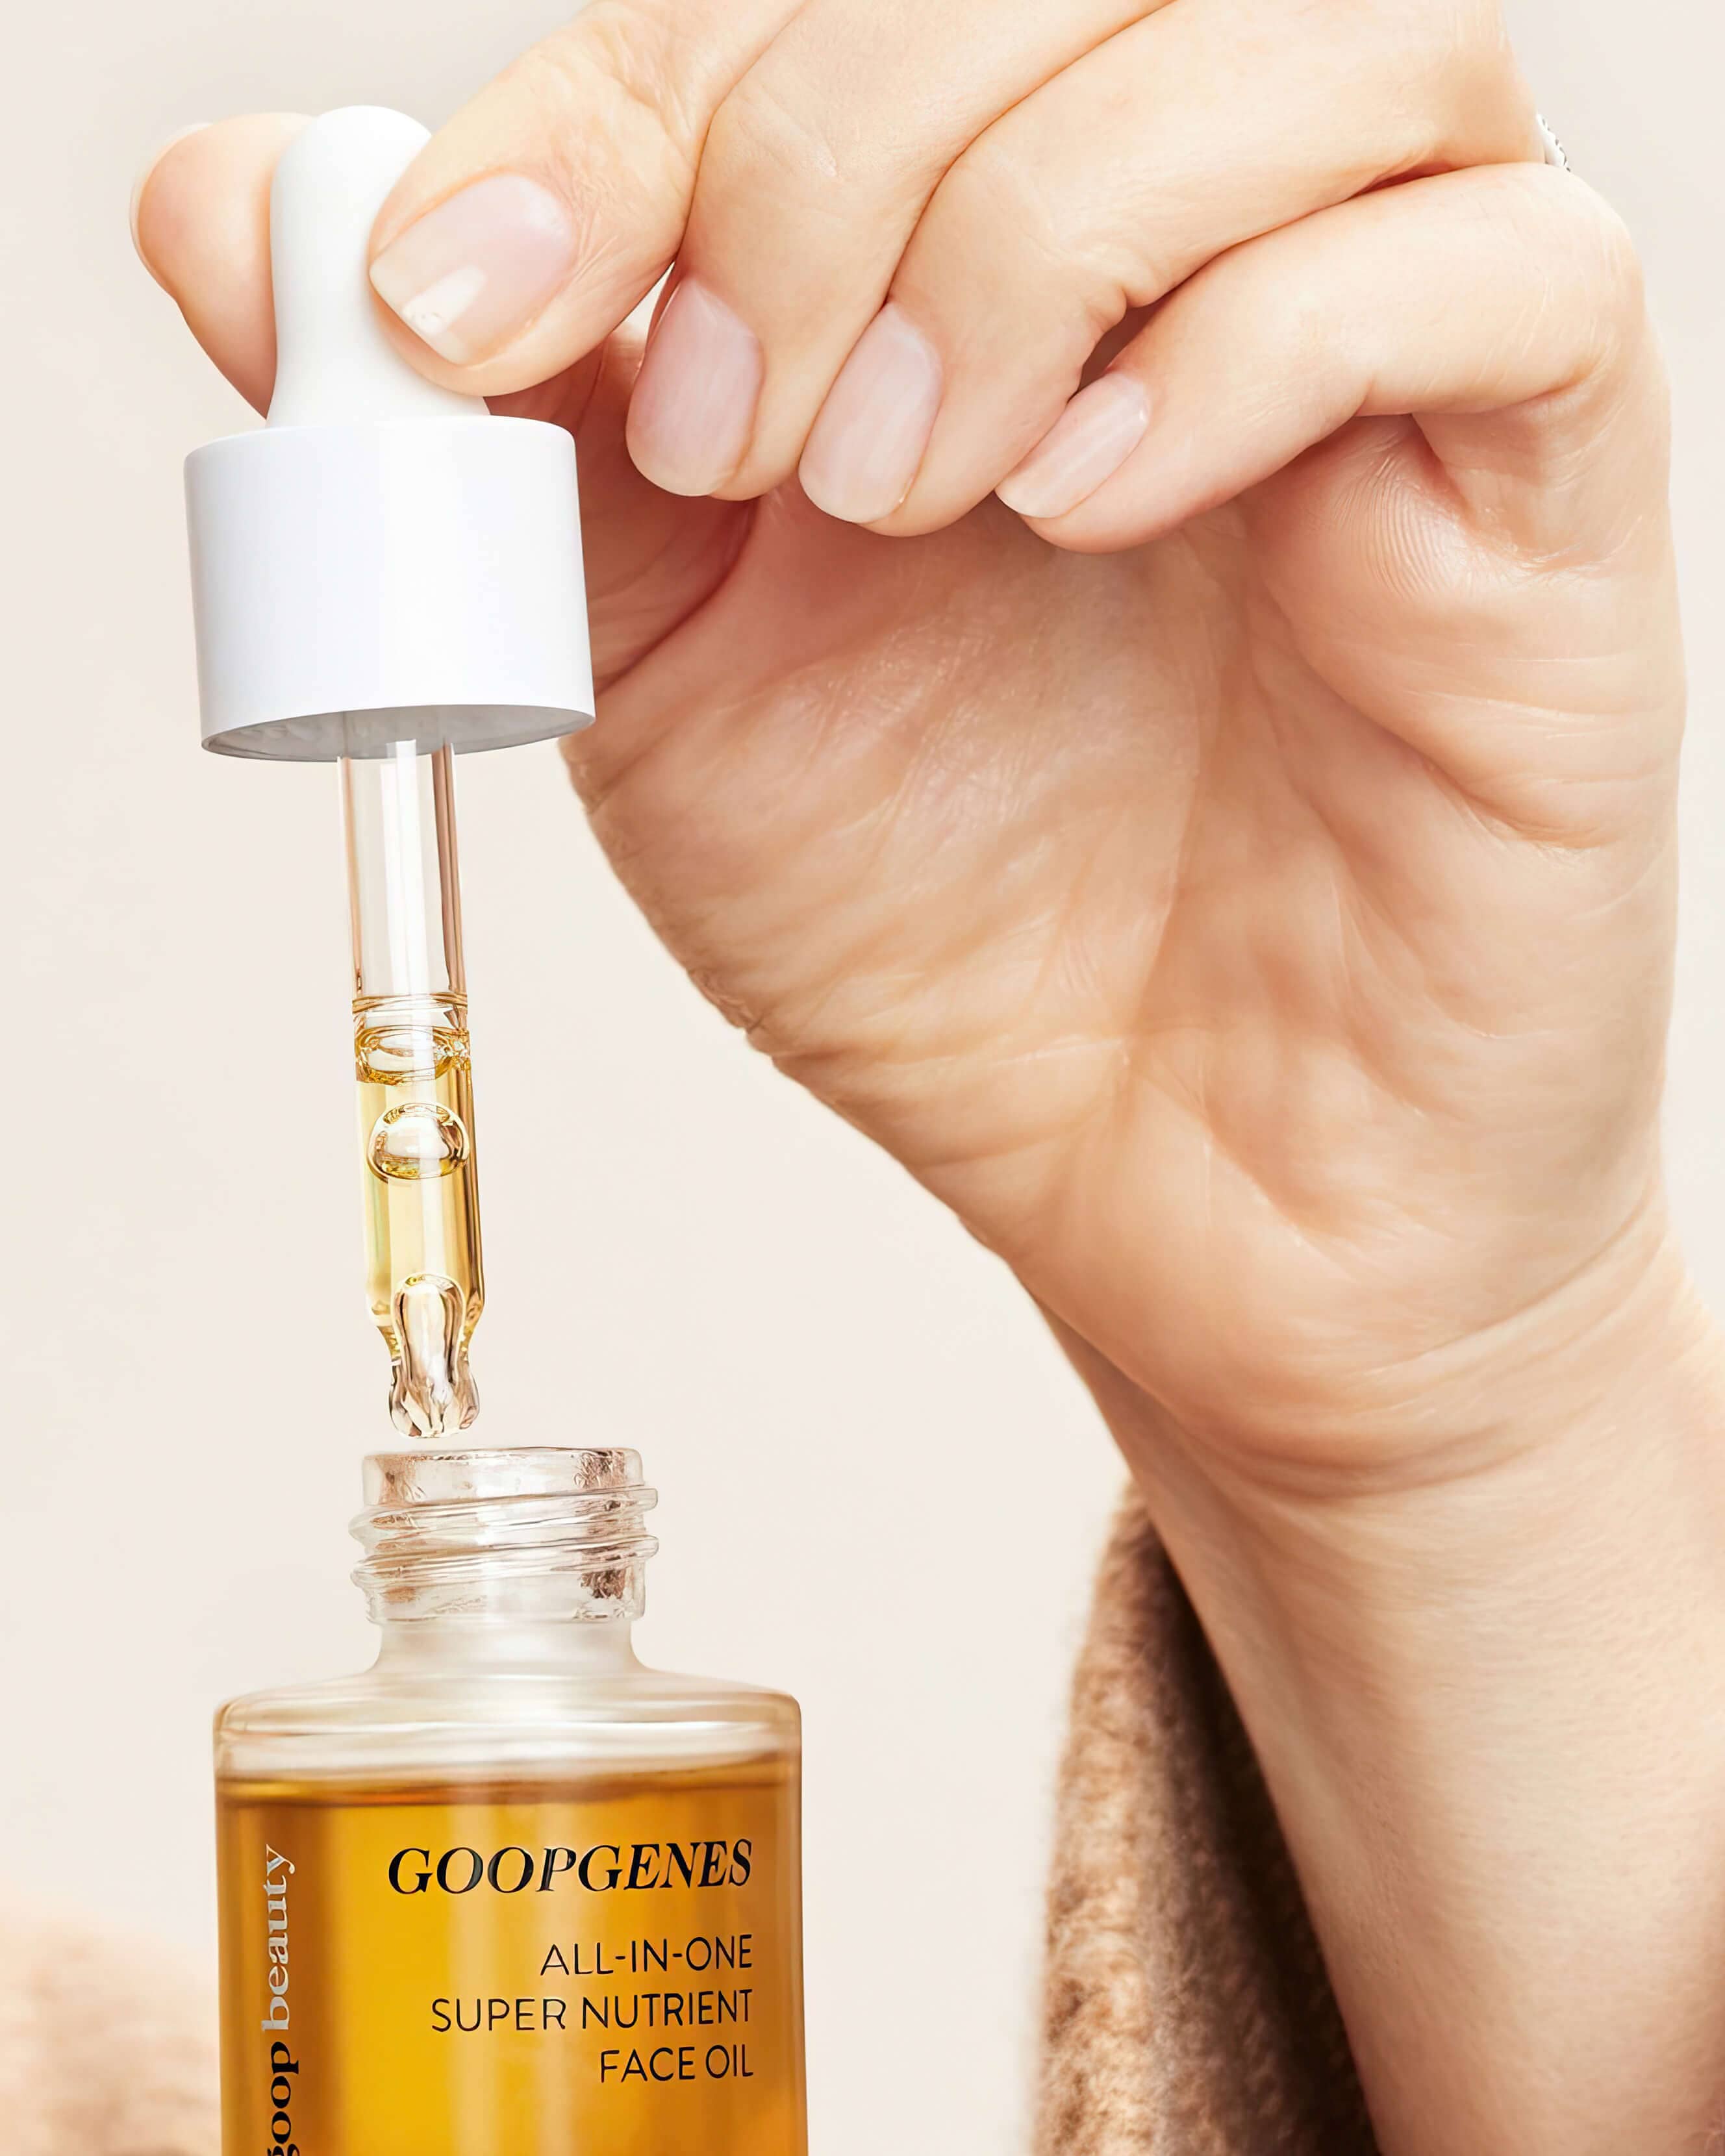 GOOPGENES All-in-One Super Nutrient Face Oil